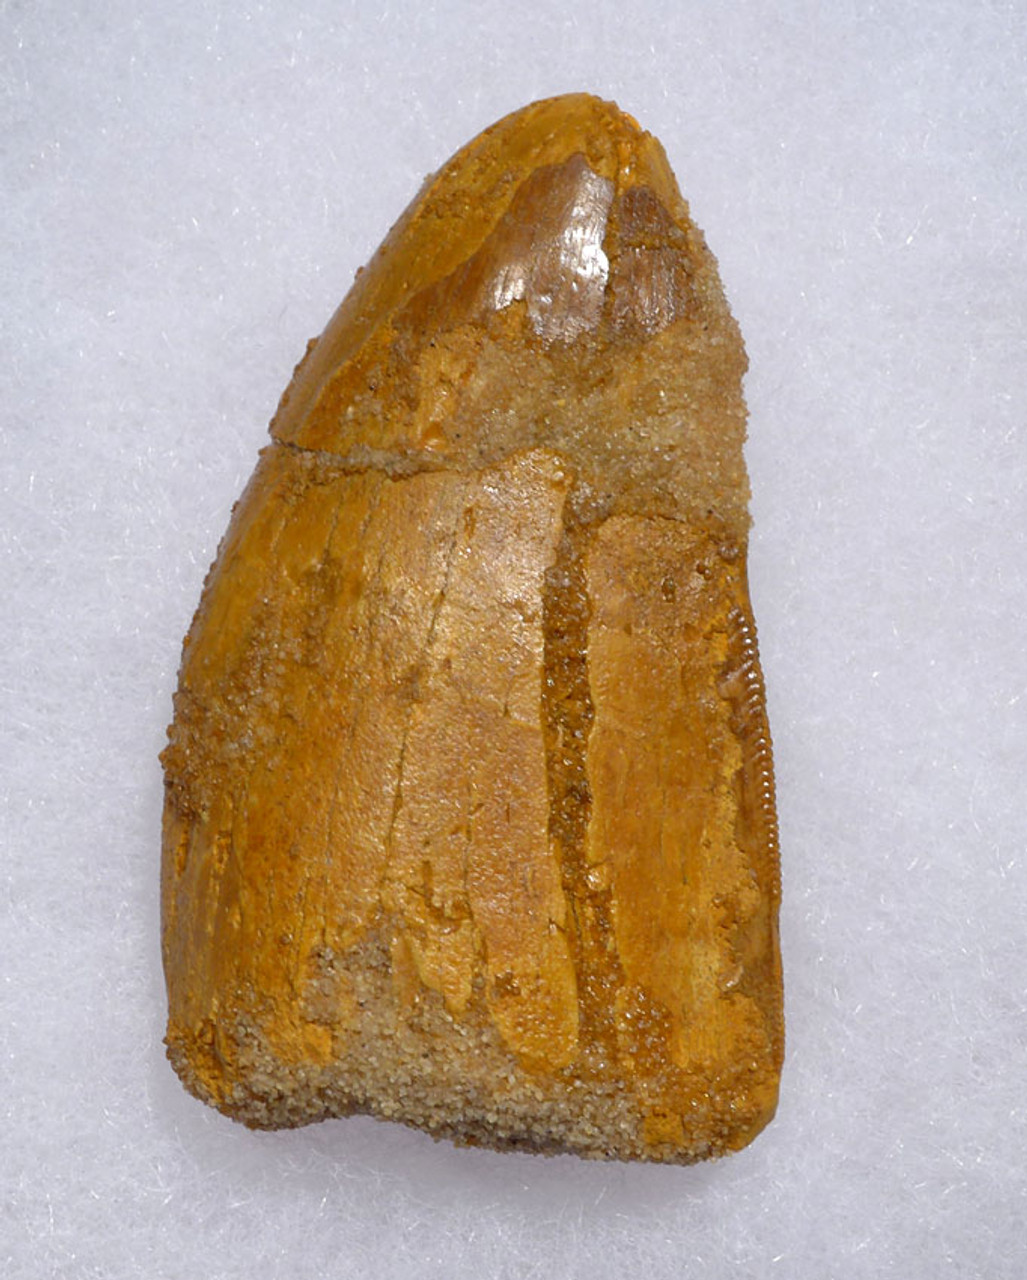 DT2-088 - FAT CARCHARODONTOSAURUS DINOSAUR FOSSIL TOOTH FROM THE LARGEST MEAT-EATING DINOSAUR 